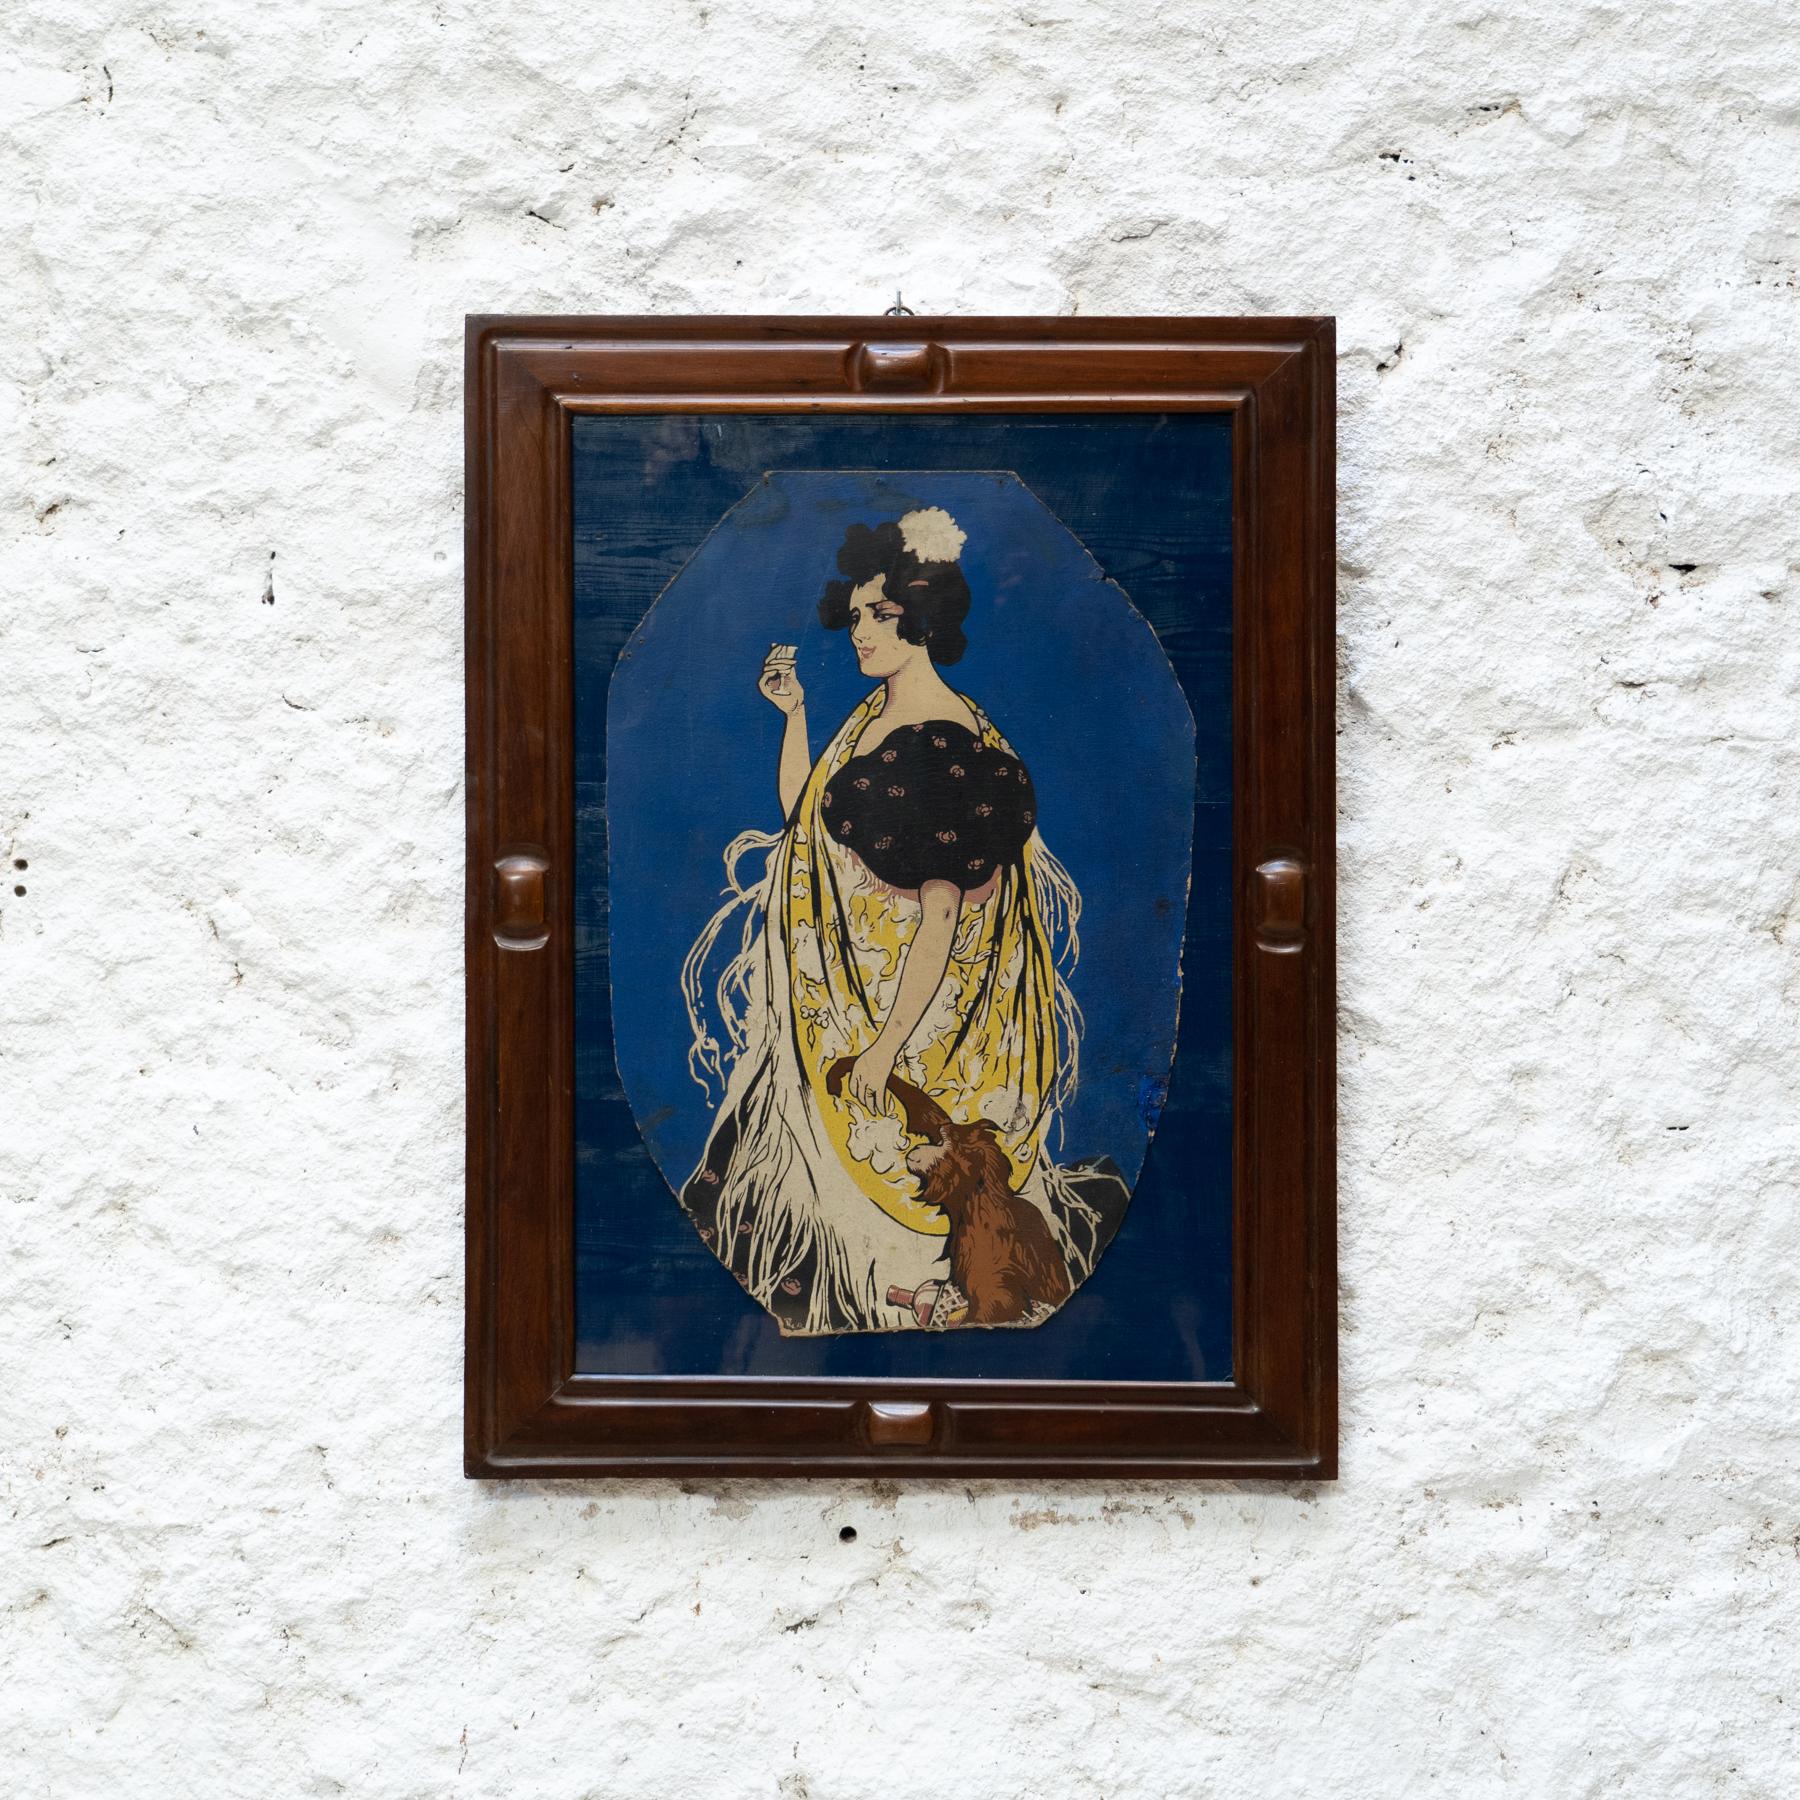 Ramon Casas 'Anis del Mono' Print Fragment Framed, circa 1930

In original condition, with minor wear consistent of age and use, preserving a beautiful patina